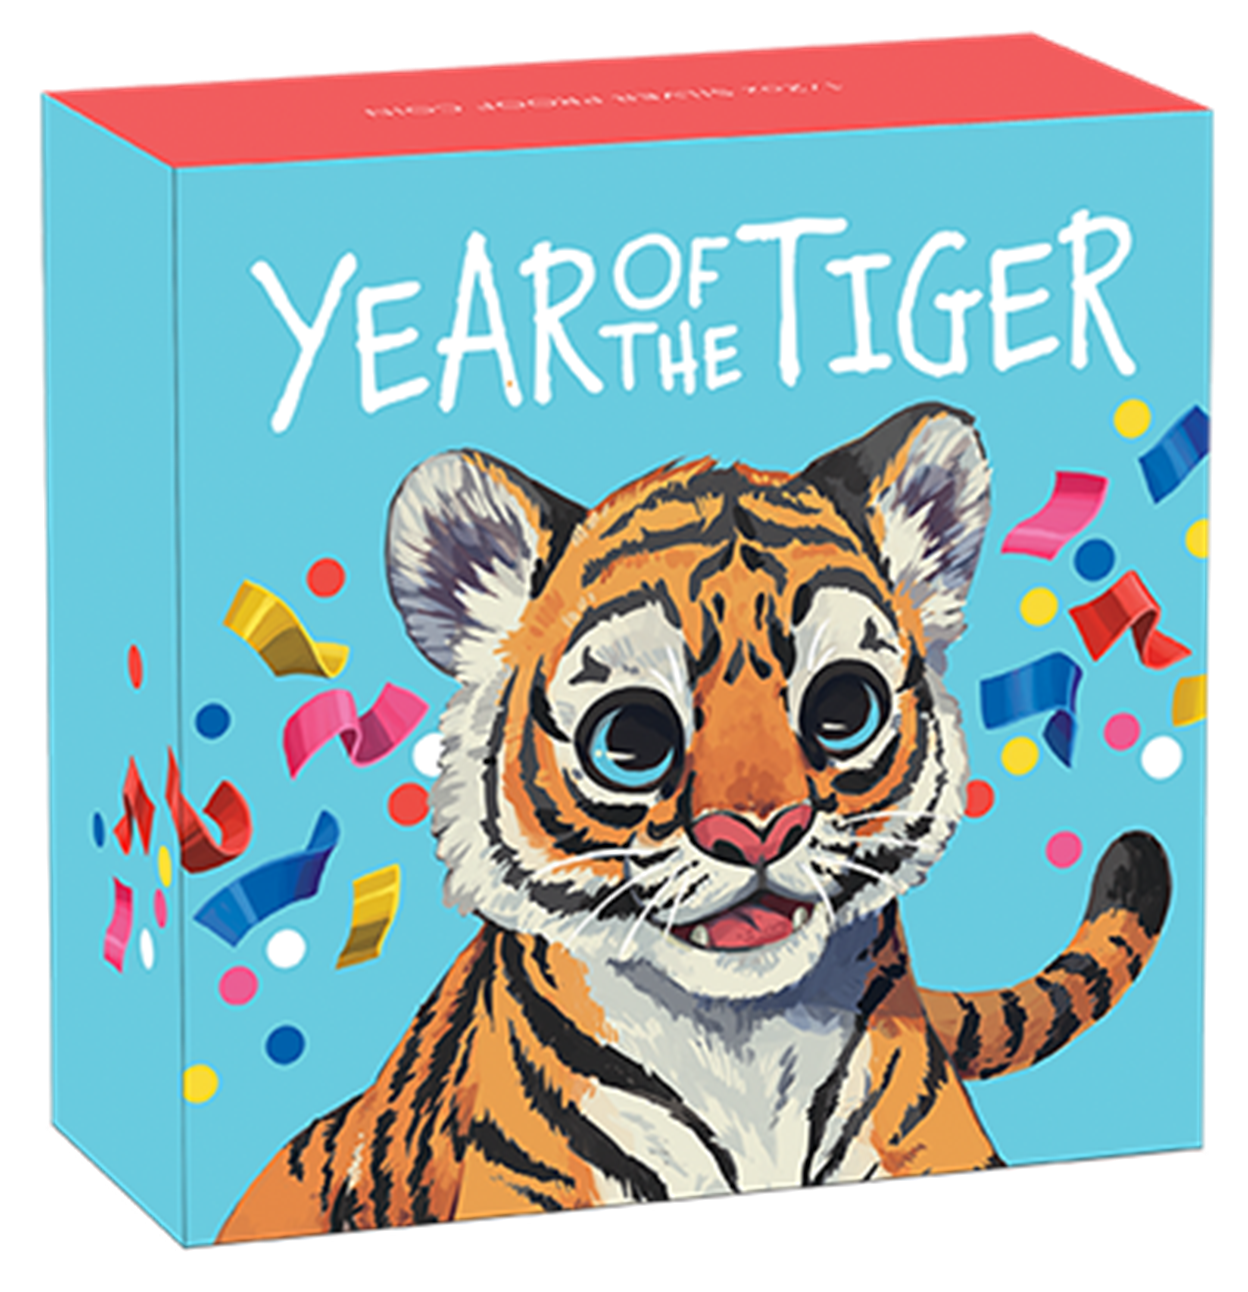 05 2022 BabyTiger 1 2oz Silver Proof Coloured InShipper LowRes